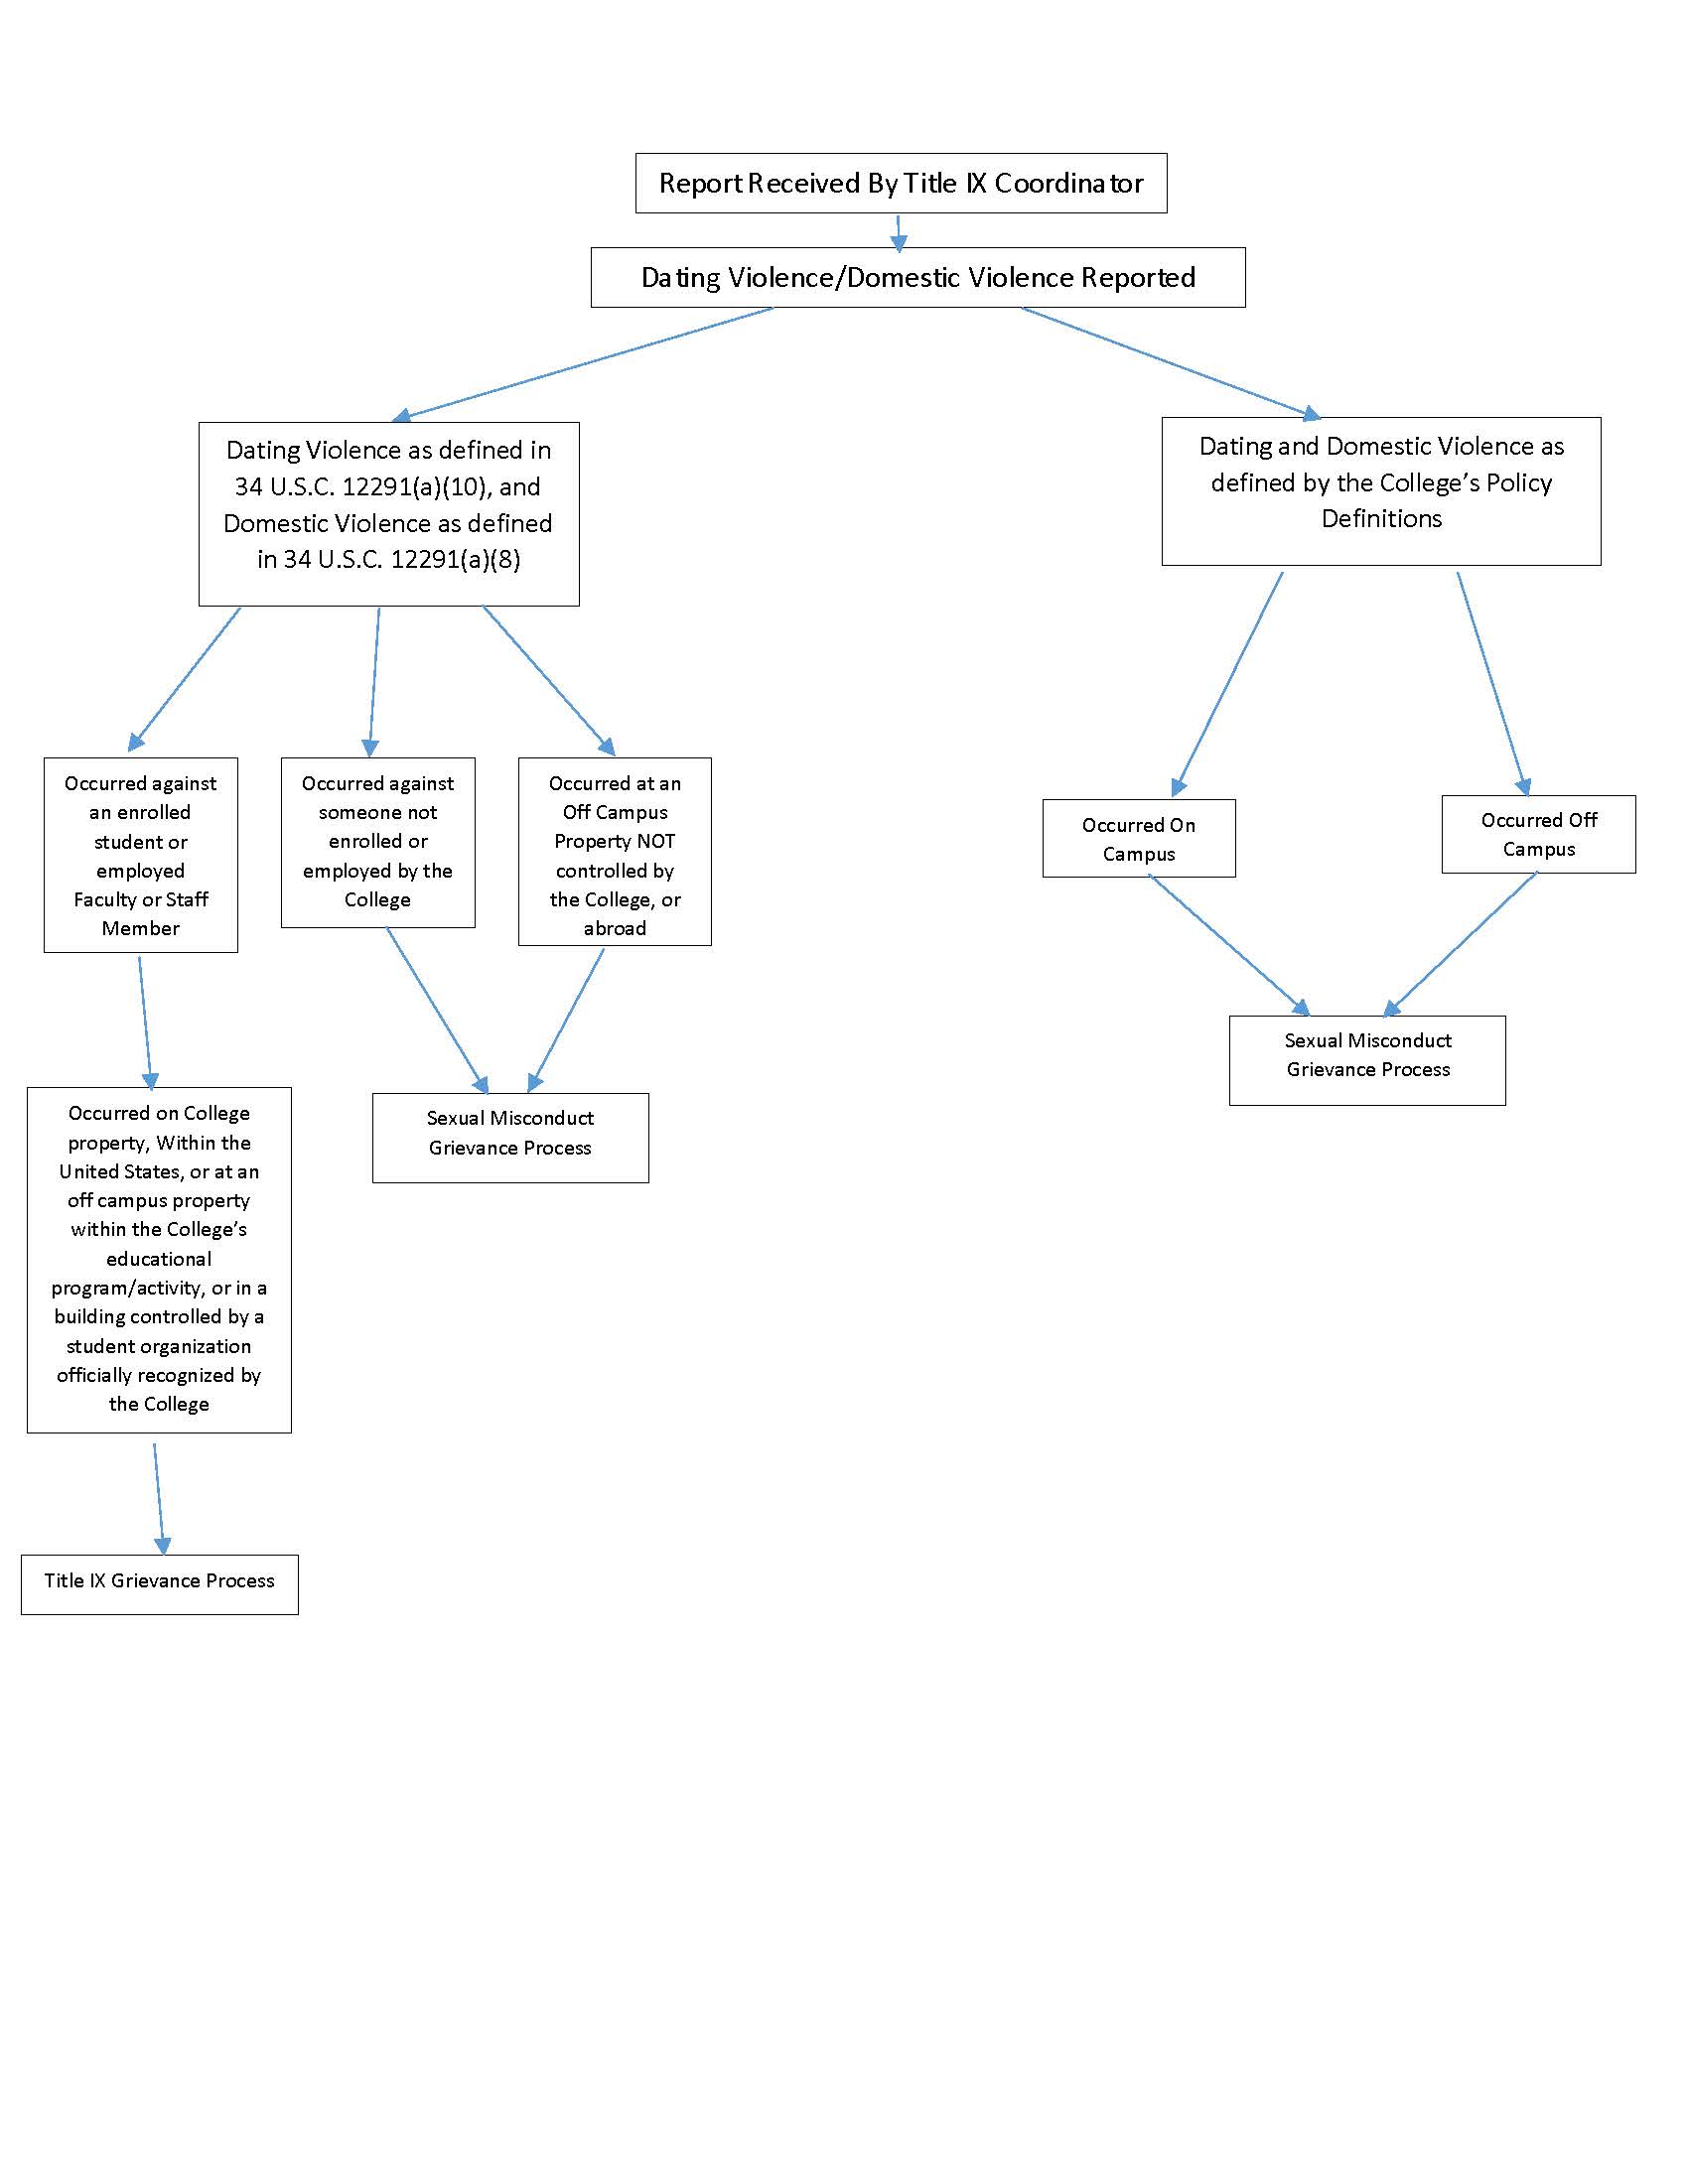 Assessment Flow Charts when dating violence is reported - see text below for details